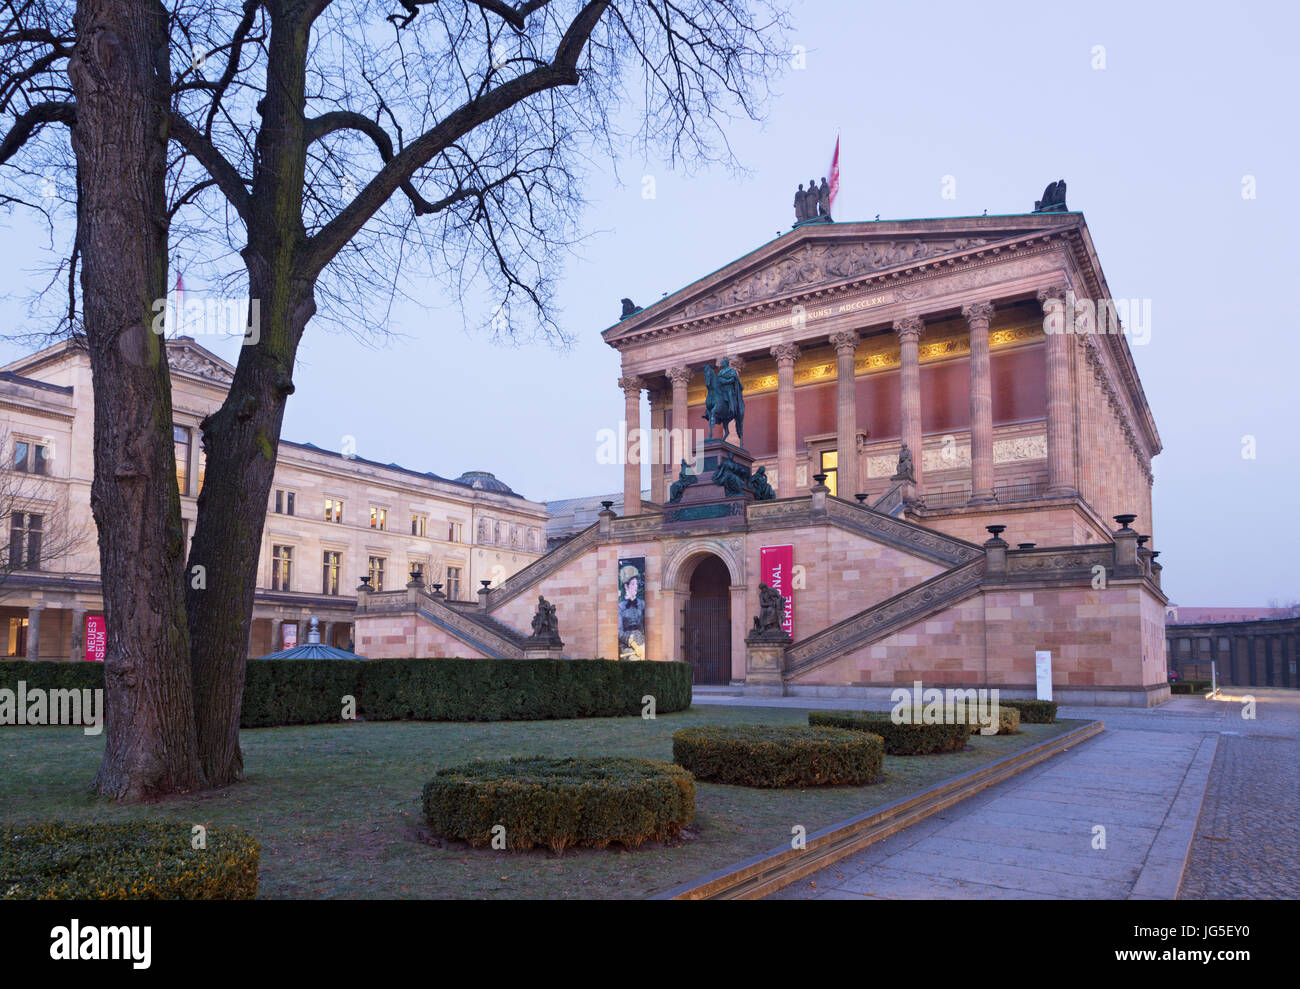 BERLIN, GERMANY, FEBRUARY - 14, 2017: The neoclassical building of Old National Gallery. Stock Photo